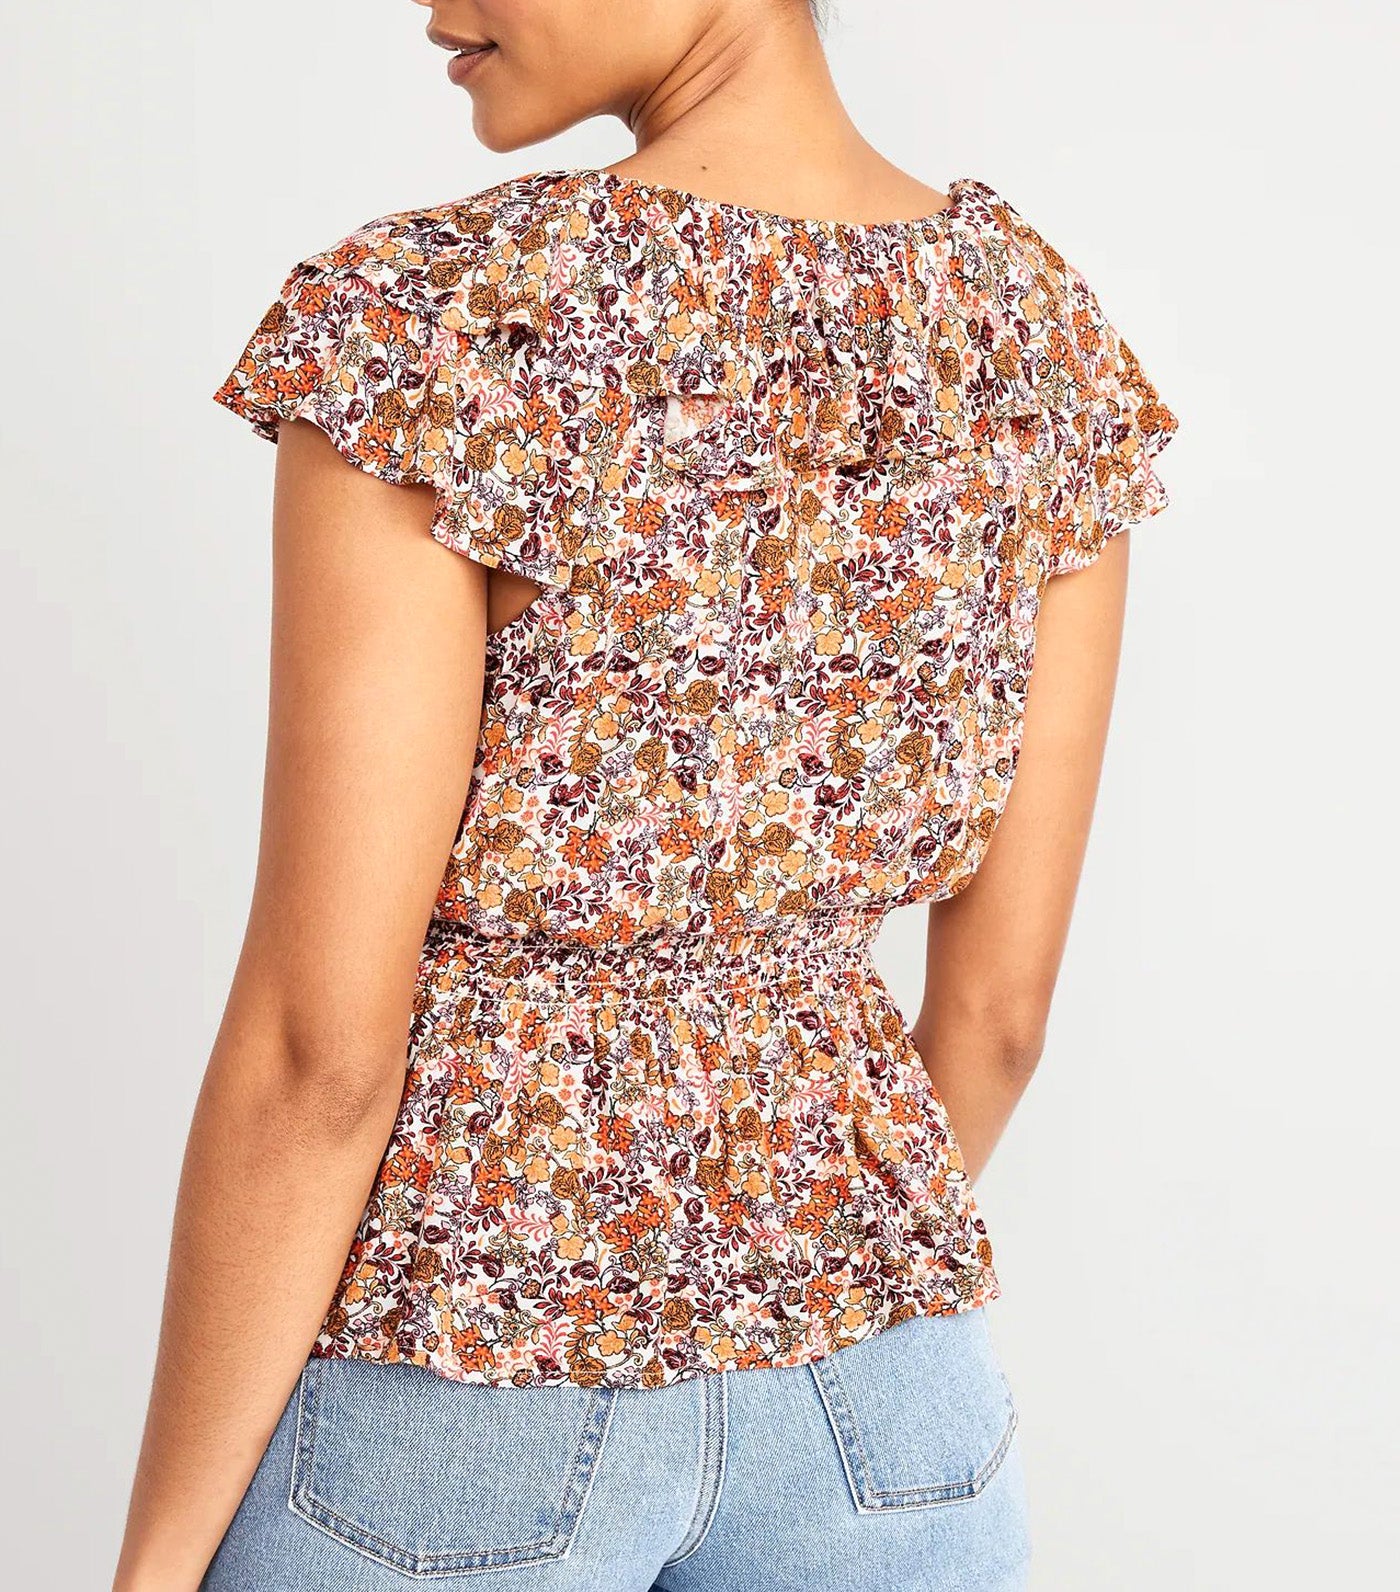 Waist-Defined Sleeveless Ruffle-Trim Top for Women Ditsy Floral